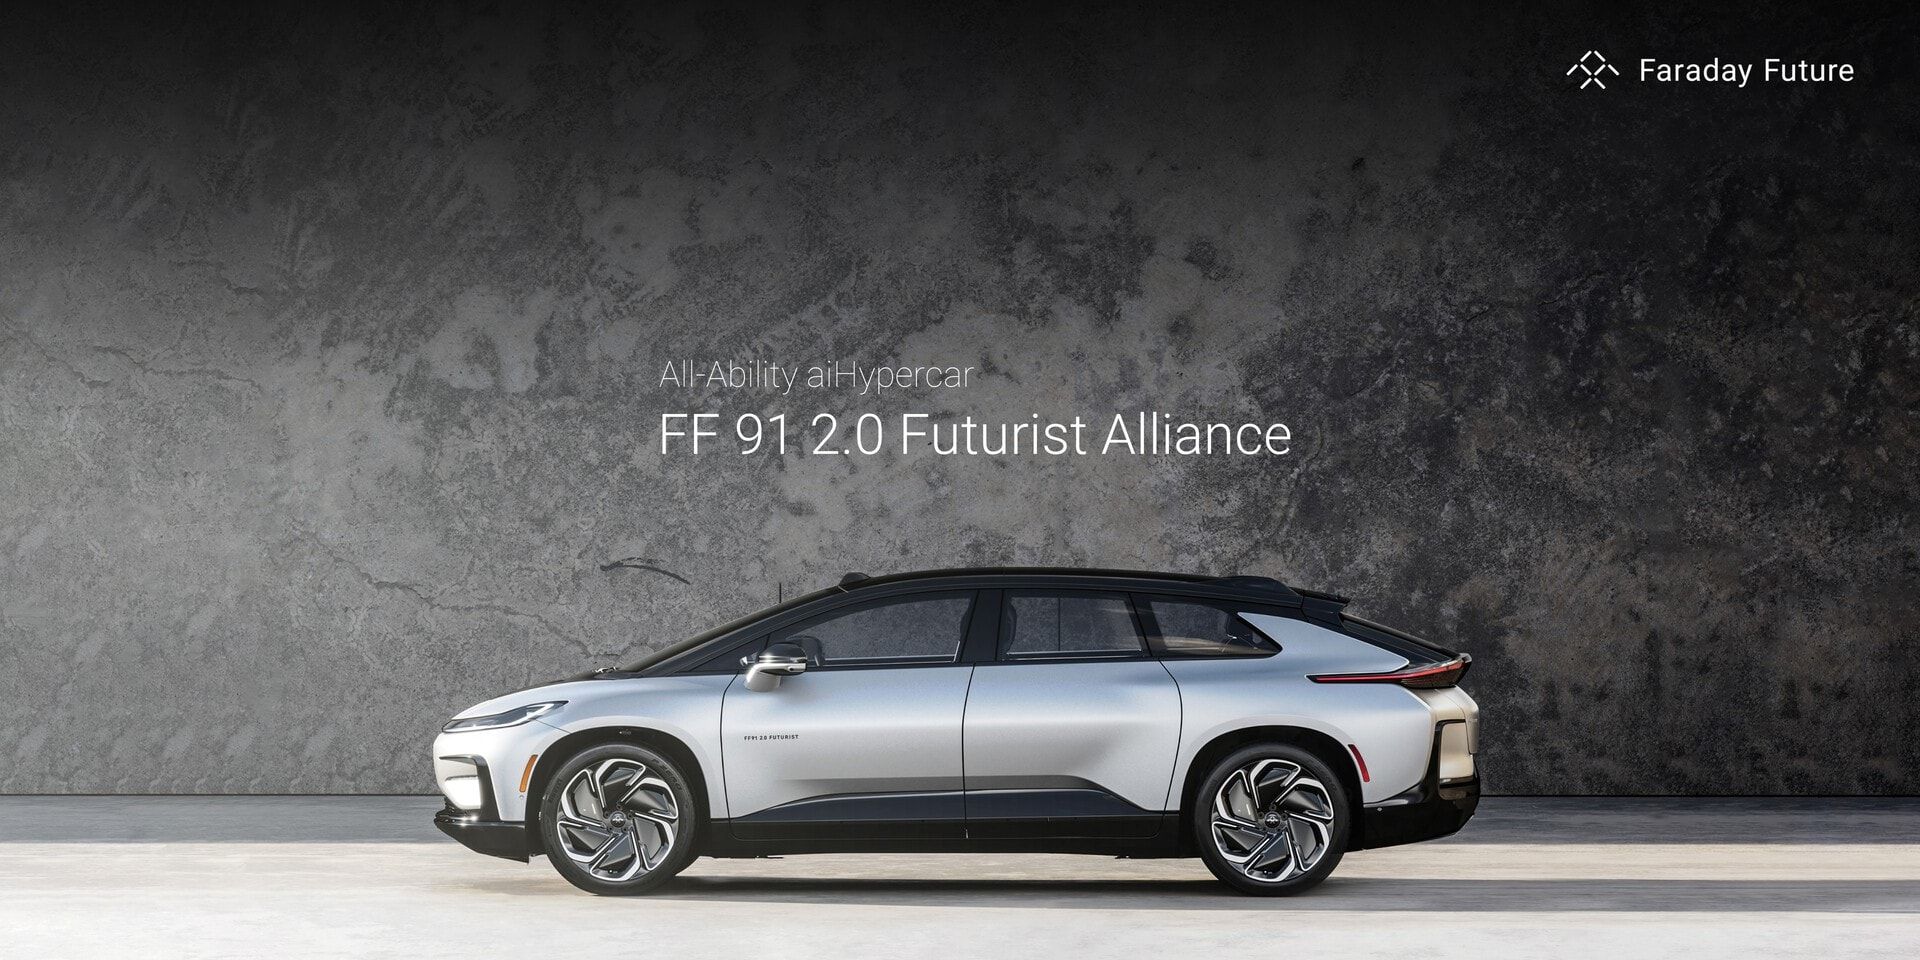 The Faraday Future FF 91 Launch Edition Starts at $309,000